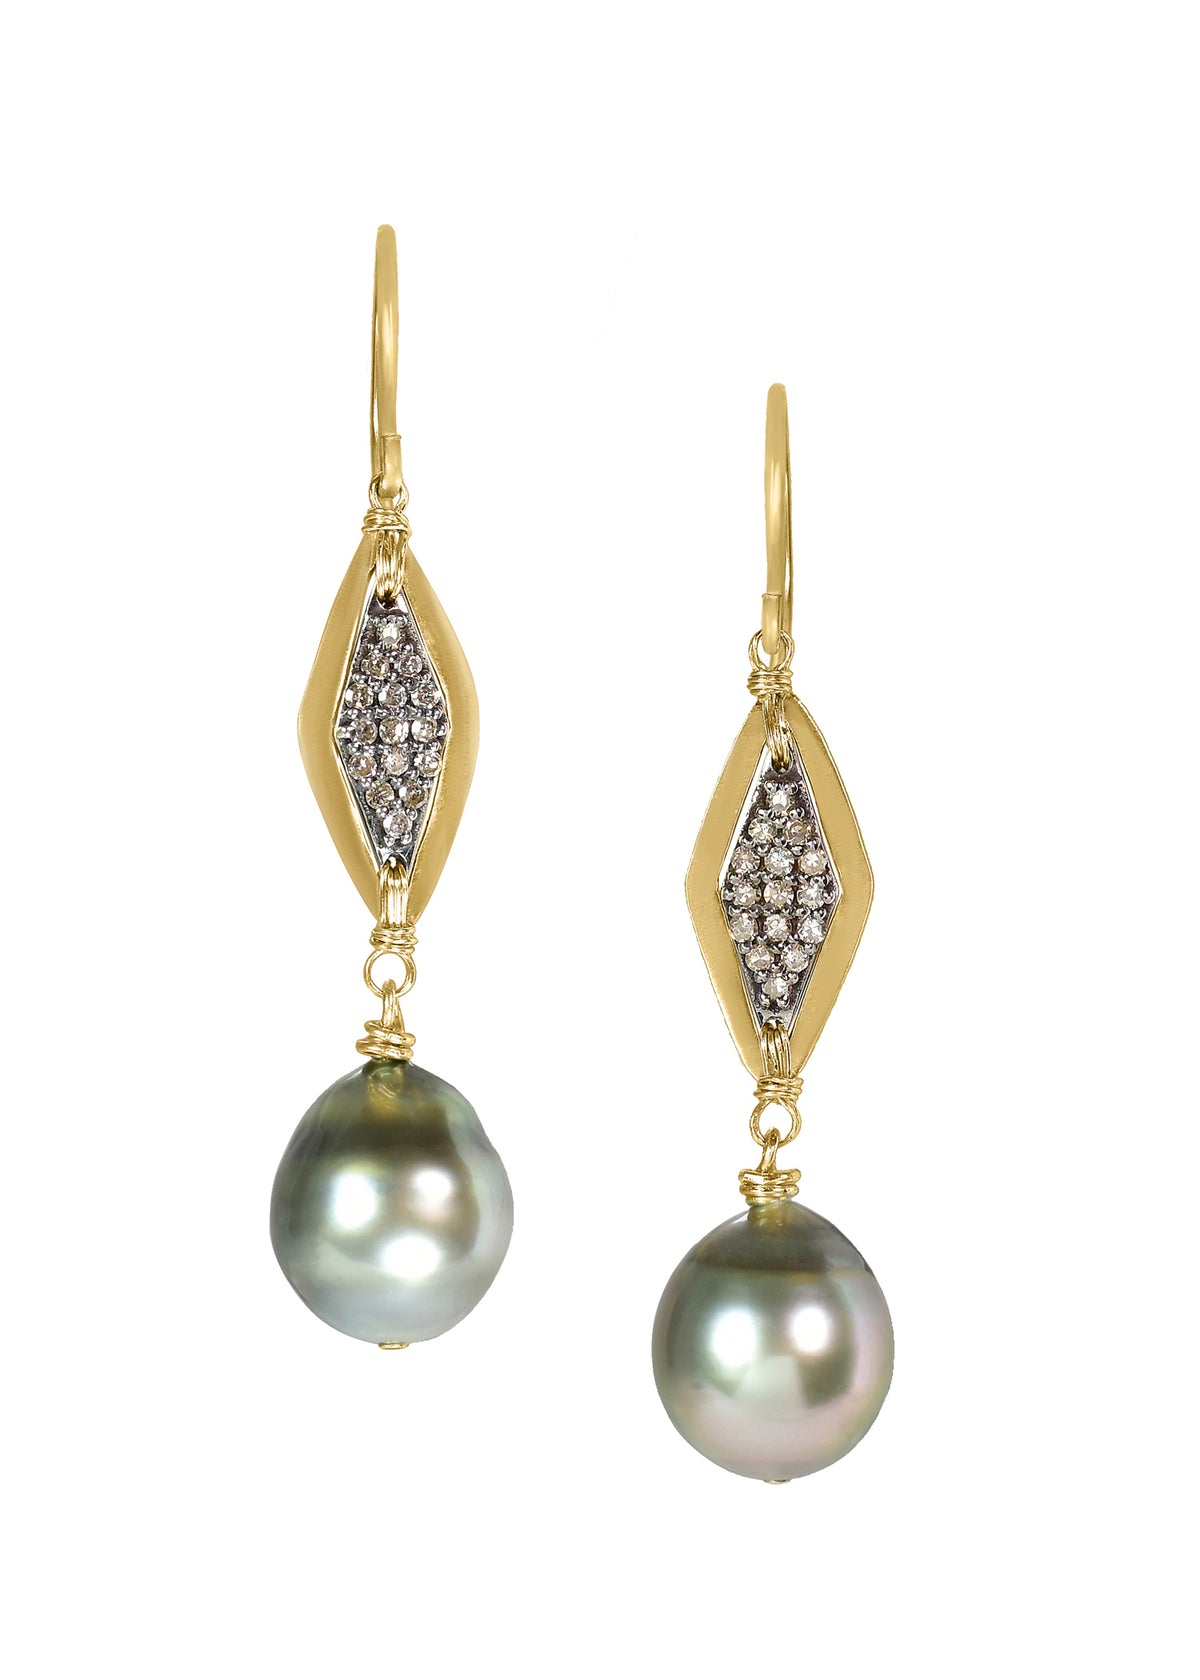 Diamond Tahitian pearl 14k gold Sterling silver Mixed metal Special order only Earrings measure 1-5/8&quot; in length (including the ear wires) and 3/8&quot; across the widest point of the pearl Handmade in our Los Angeles studio